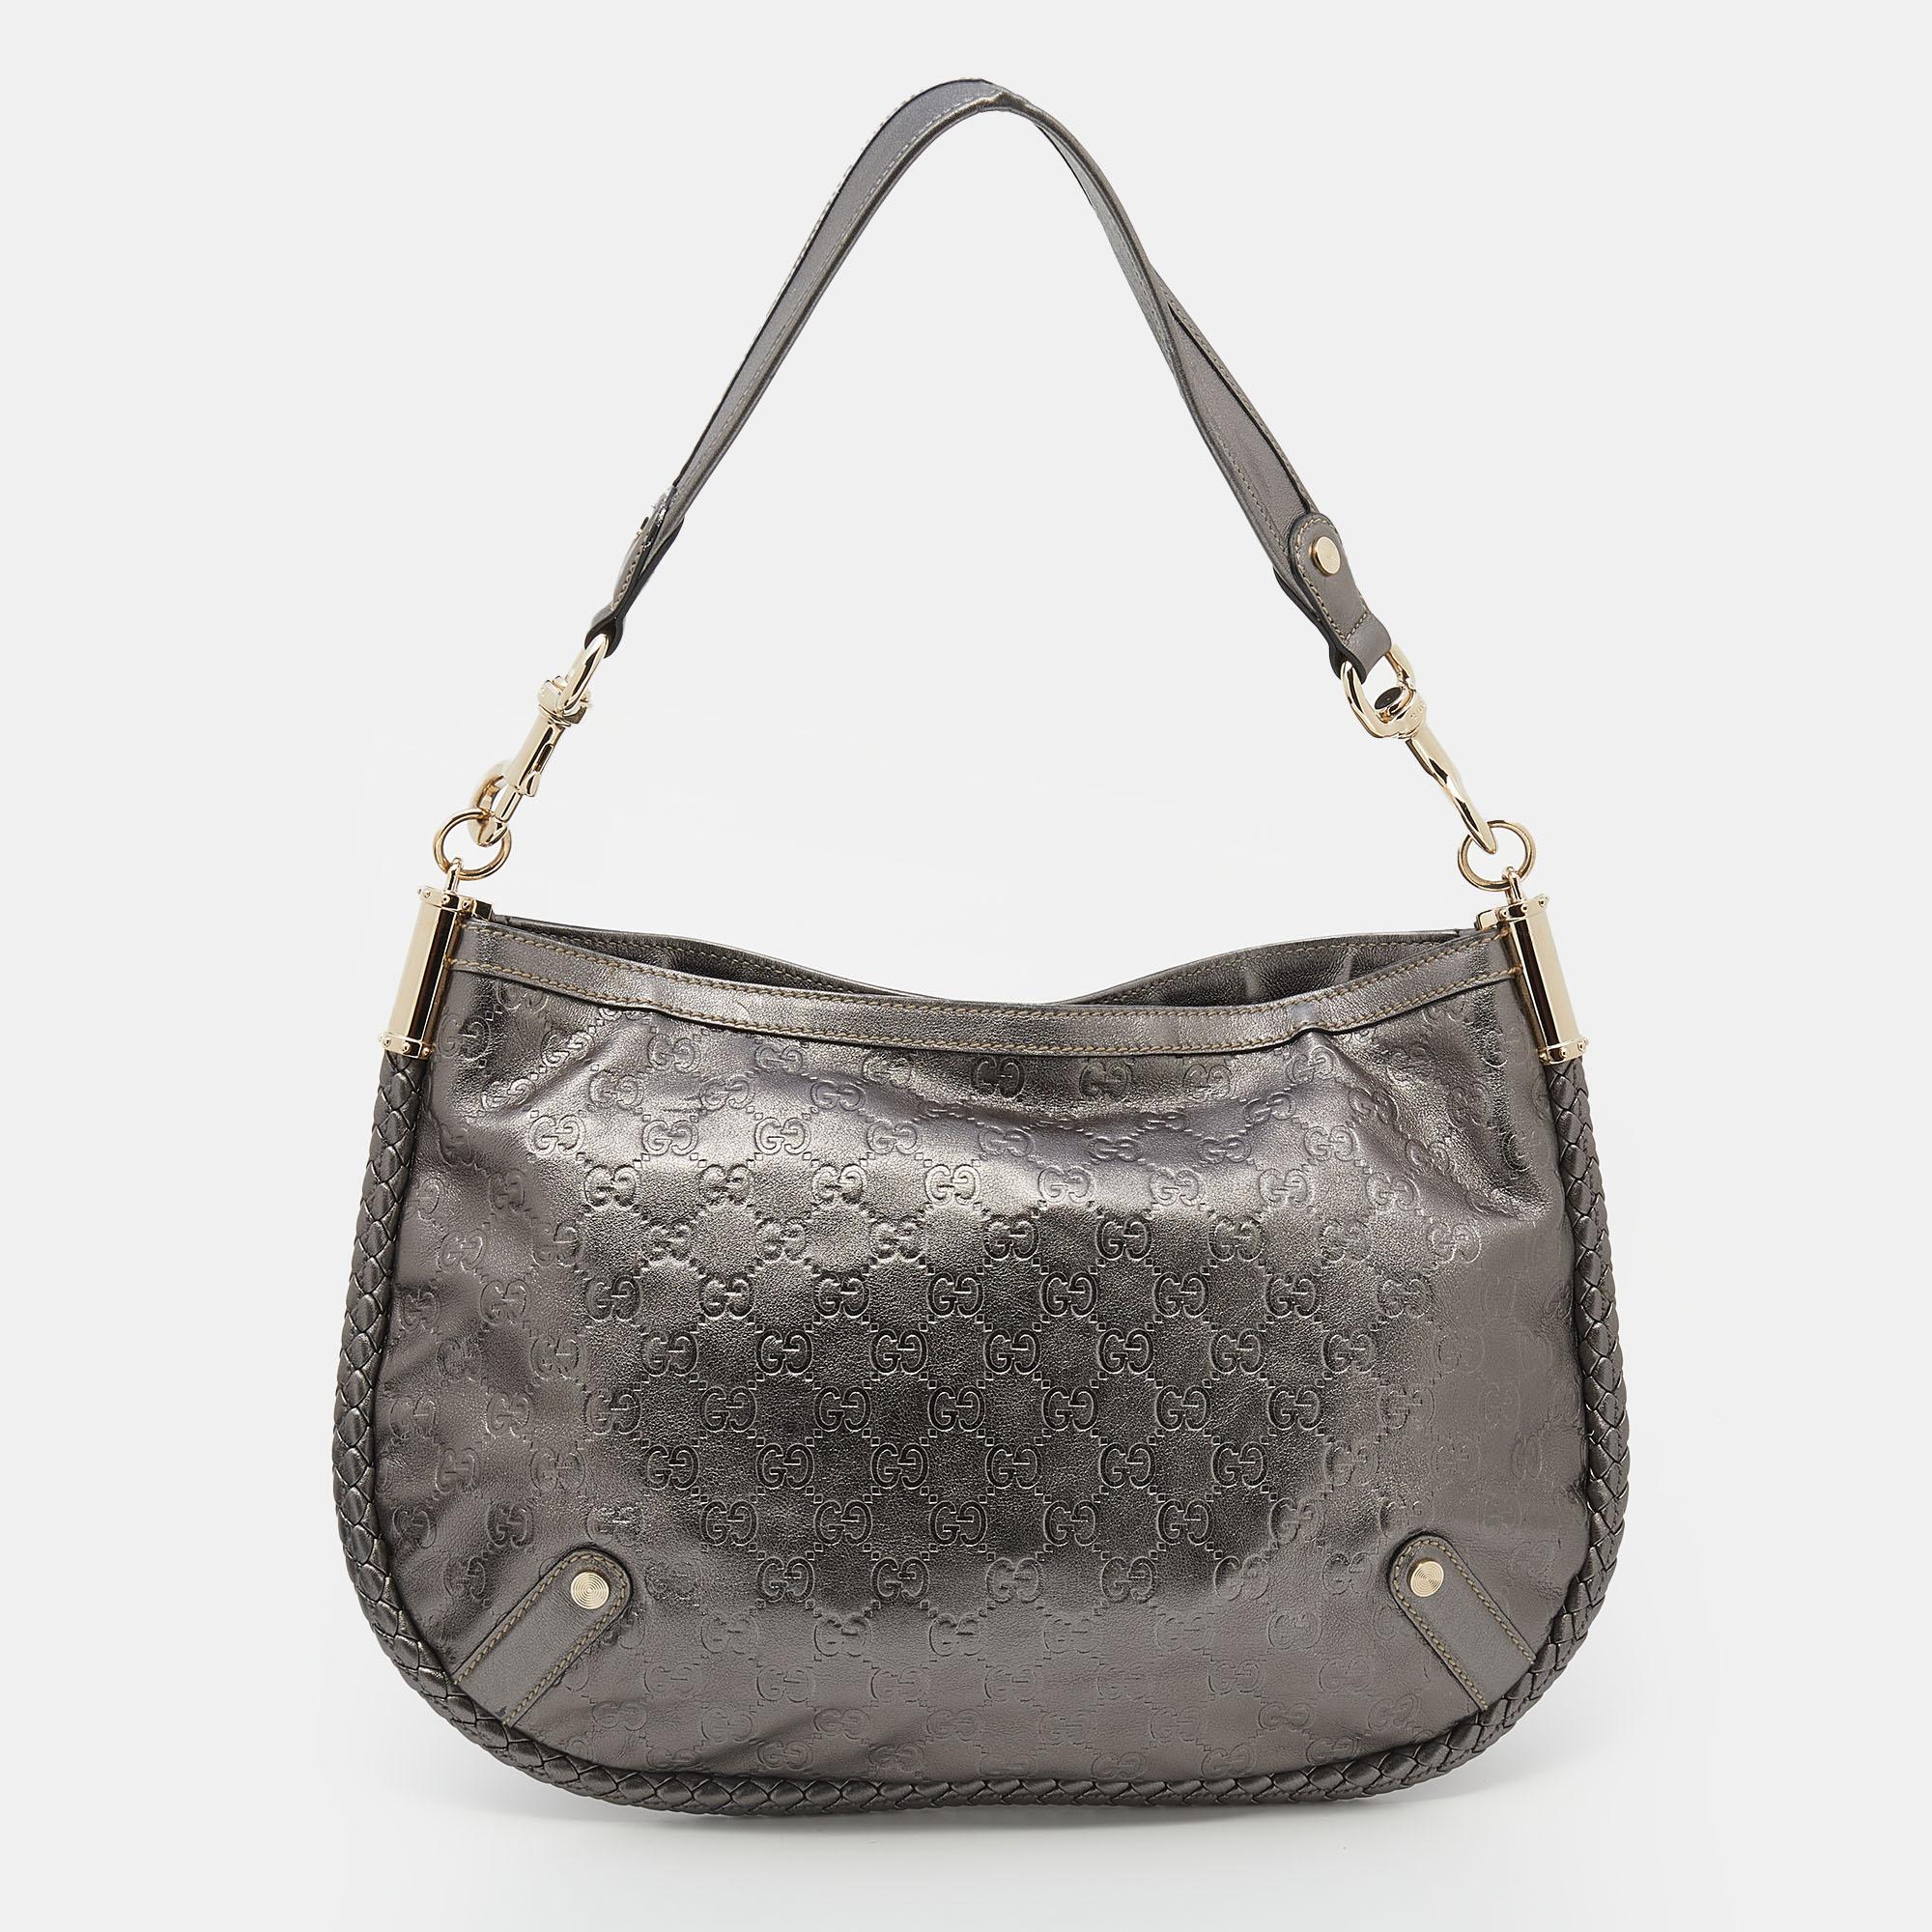 This Britt bag from the House of Gucci is both elegant and fashionable. Crafted from metallic-grey Guccissima leather, this bag features a shoulder strap, gold-tone hardware, and a fabric-lined interior. A logo accent is placed on the front. Make